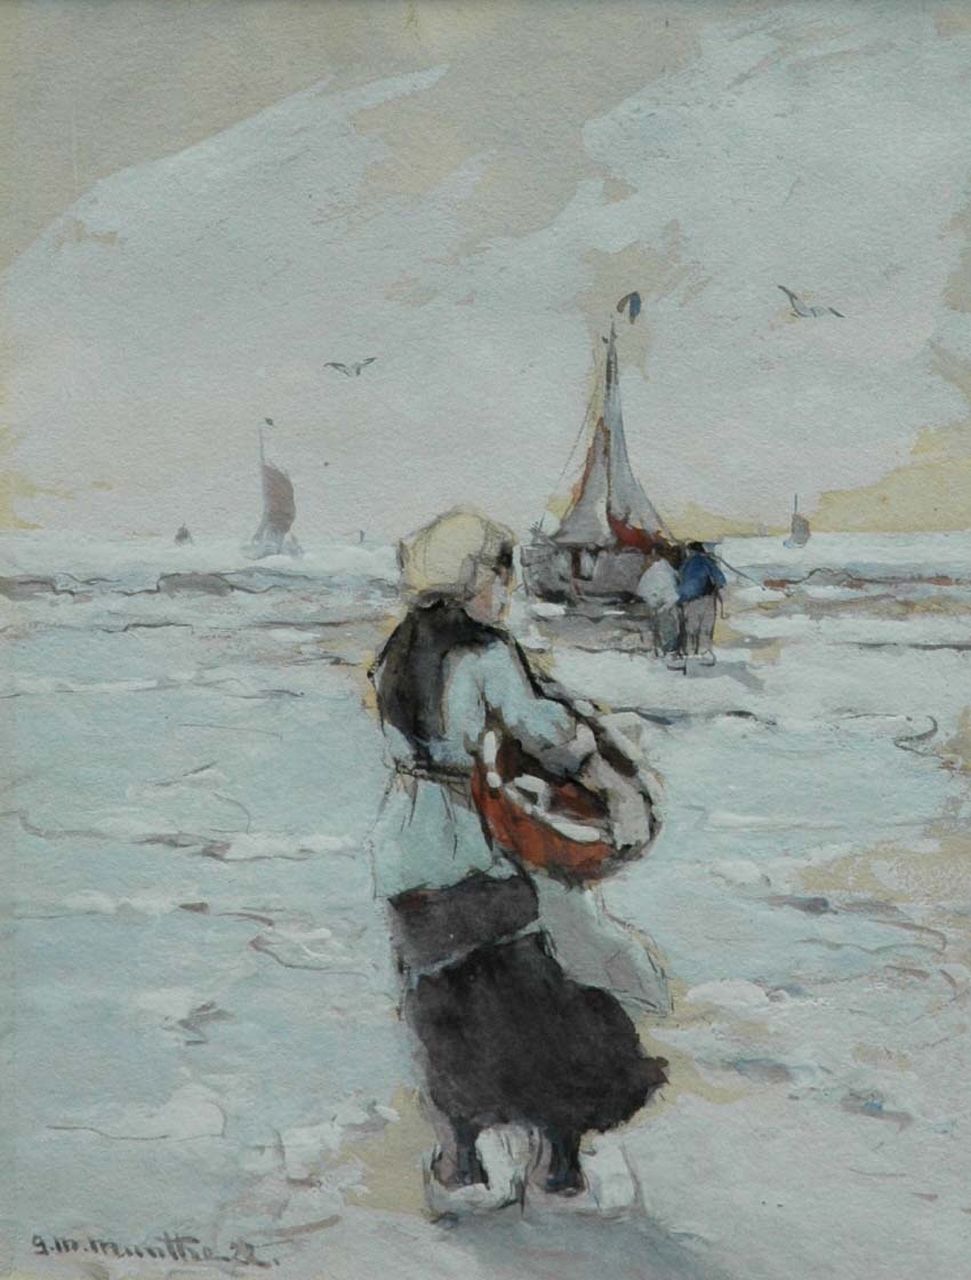 Munthe G.A.L.  | Gerhard Arij Ludwig 'Morgenstjerne' Munthe, Waiting for the catch, watercolour on paper 29.3 x 23.0 cm, signed l.l. and dated '22